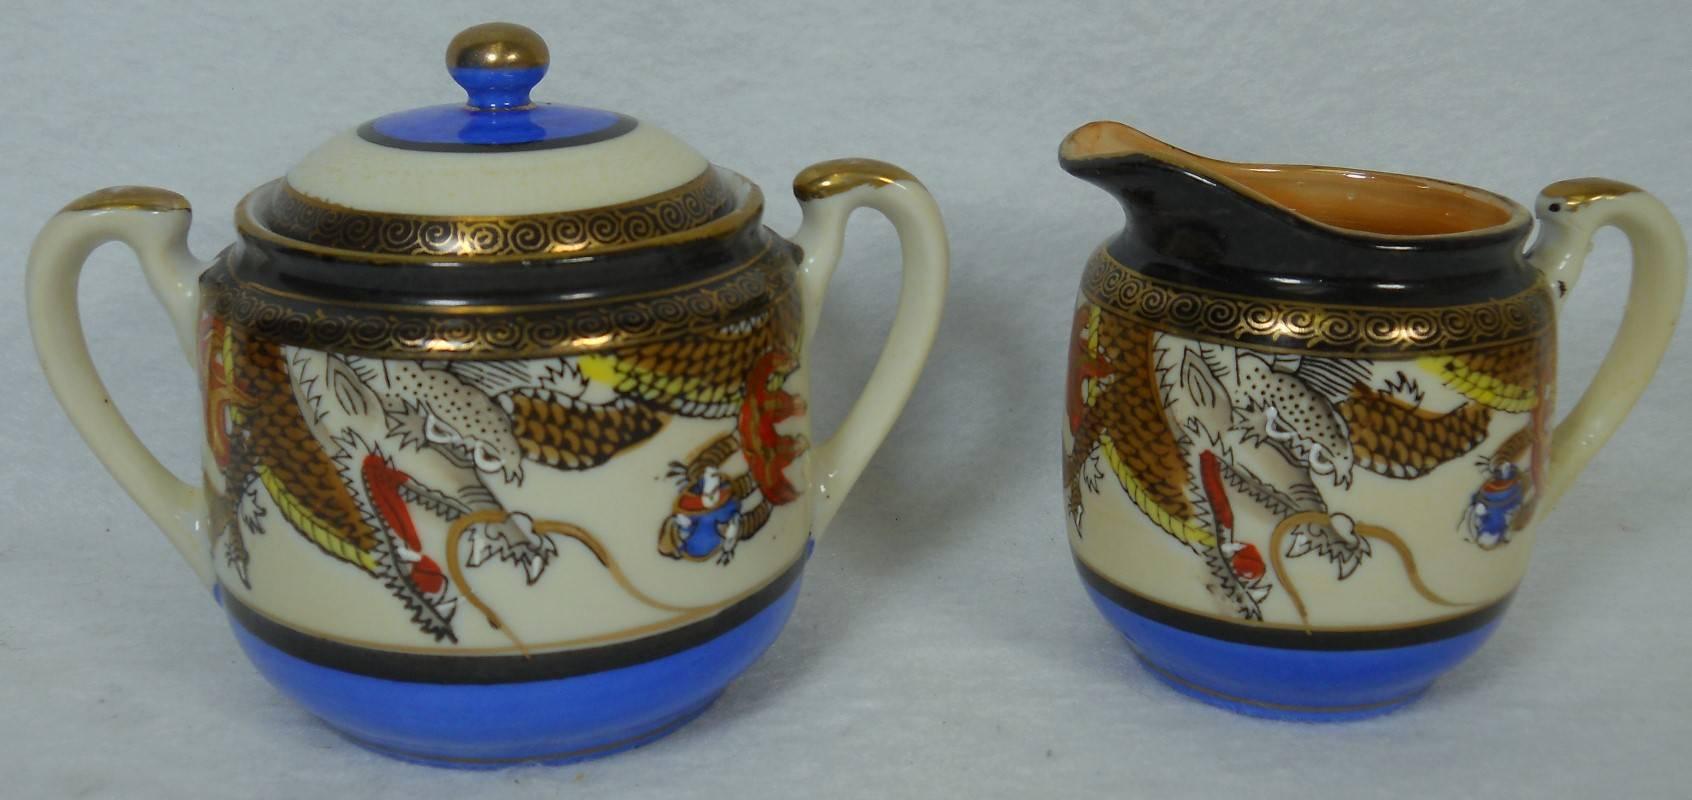 Dragonware 17-Piece Demitasse Coffee or Chocolate Set Made in Japan In Excellent Condition For Sale In St. Petersburg, FL